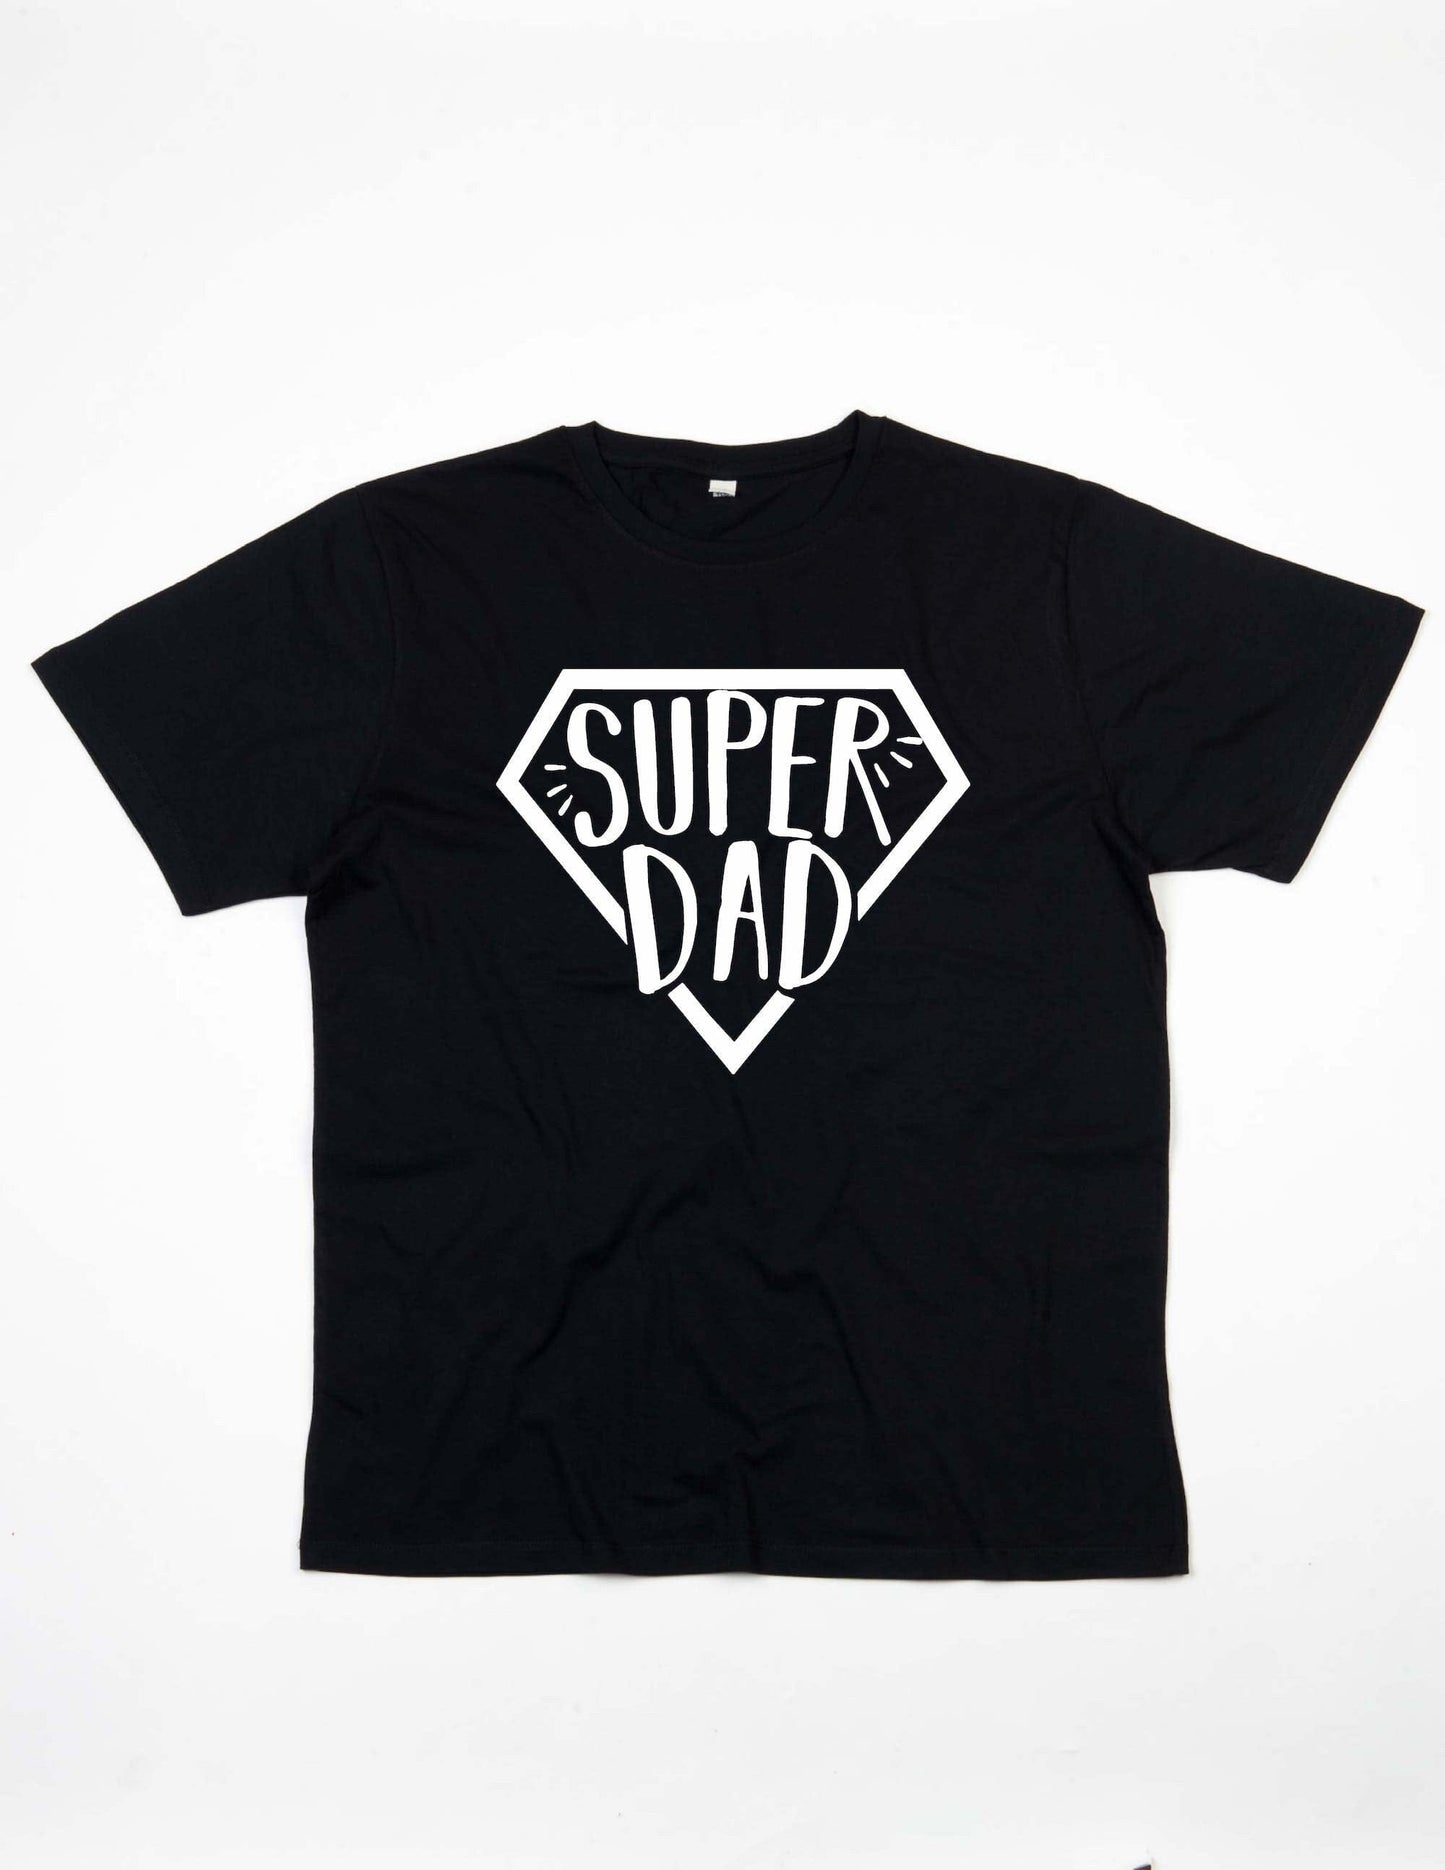 Super Dad shirt , fathers day funny super hero dad shirt new dad t shirt, dad t-shirt, Funny Birthday dad gifts, Fathers day gift for daddy